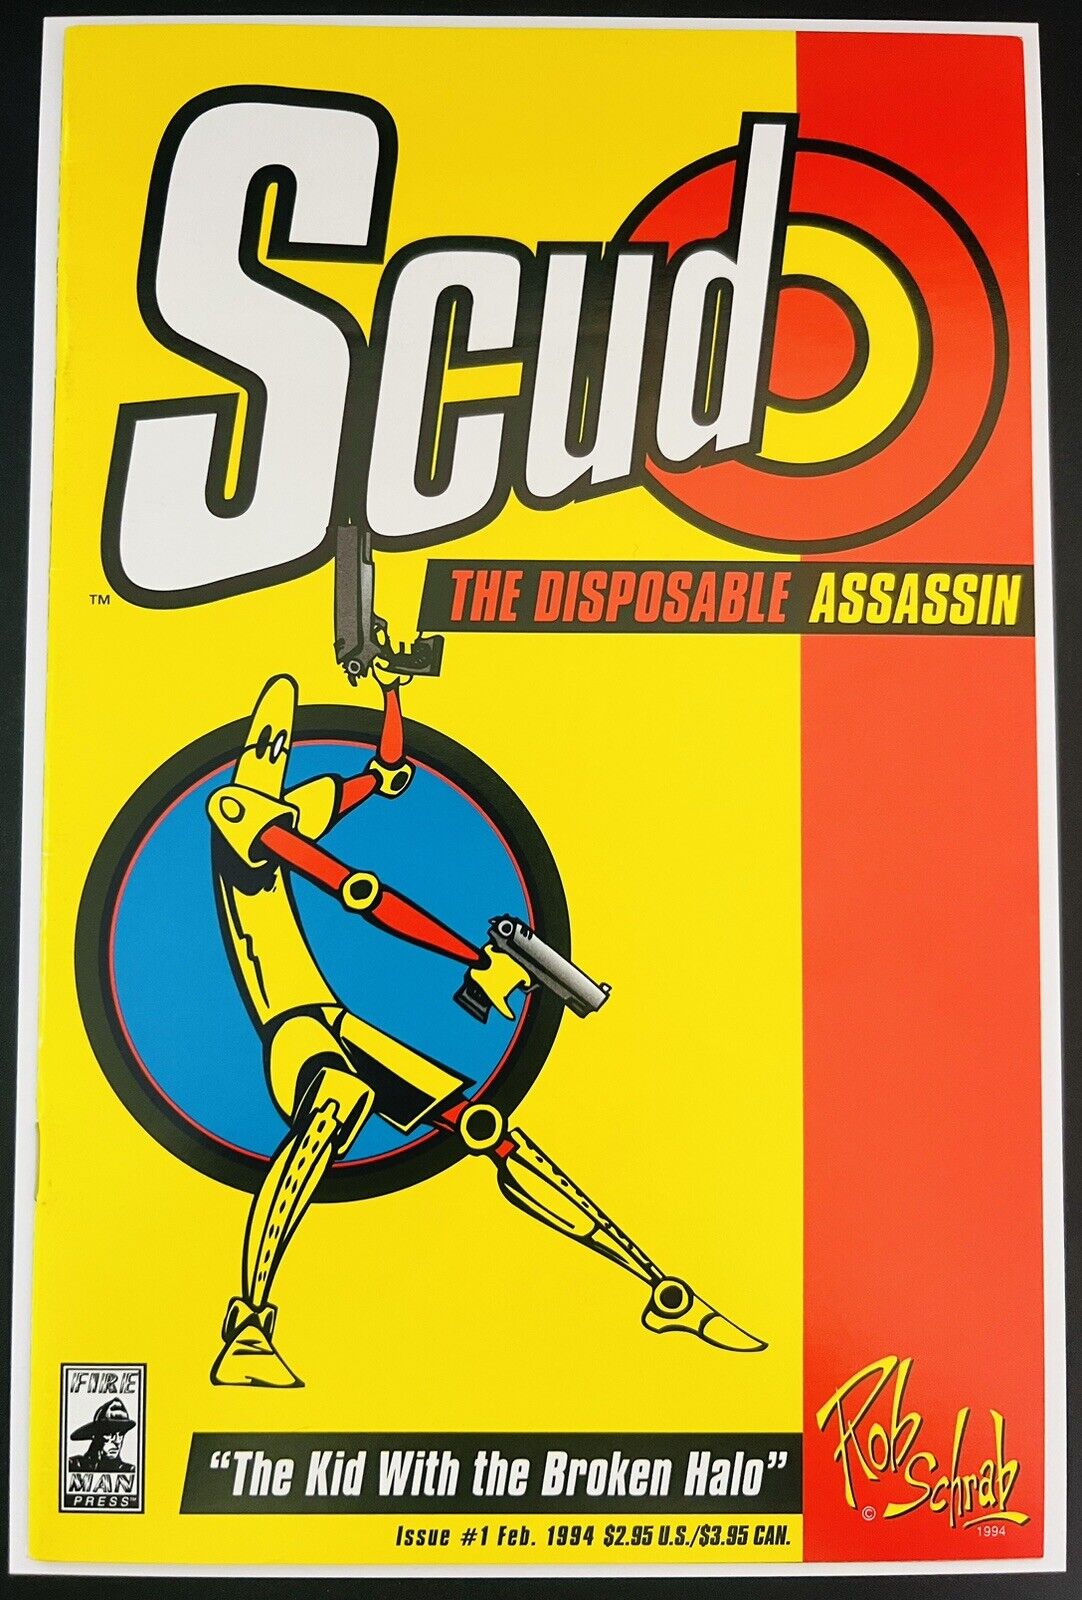 Scud the Disposable Assassin #1 Signed By Rob Schrab -Fireman 1994 1st App RARE